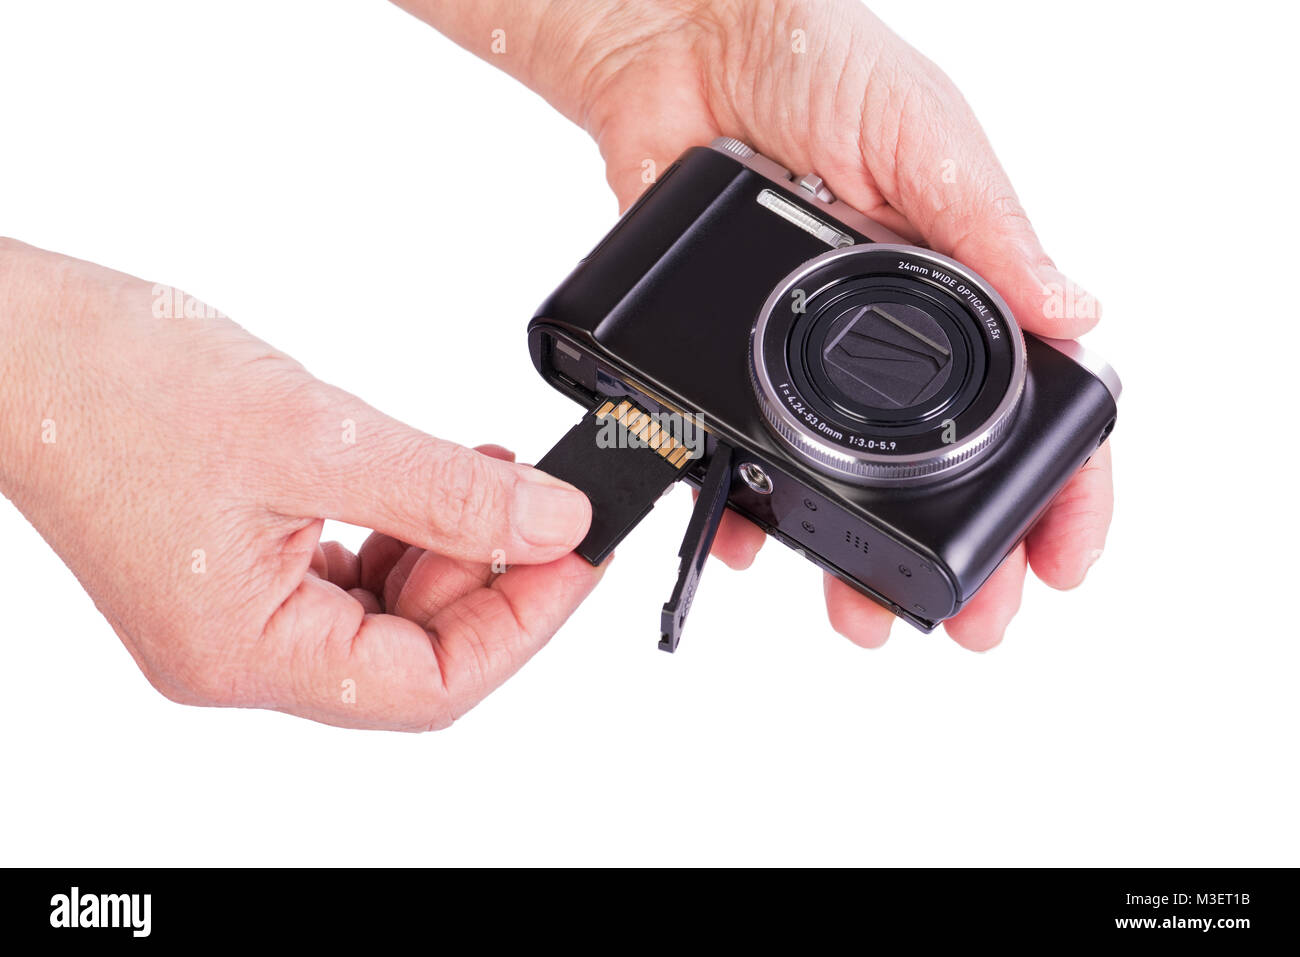 Insert memory card into the camera. Woman's hands on a white background. Stock Photo